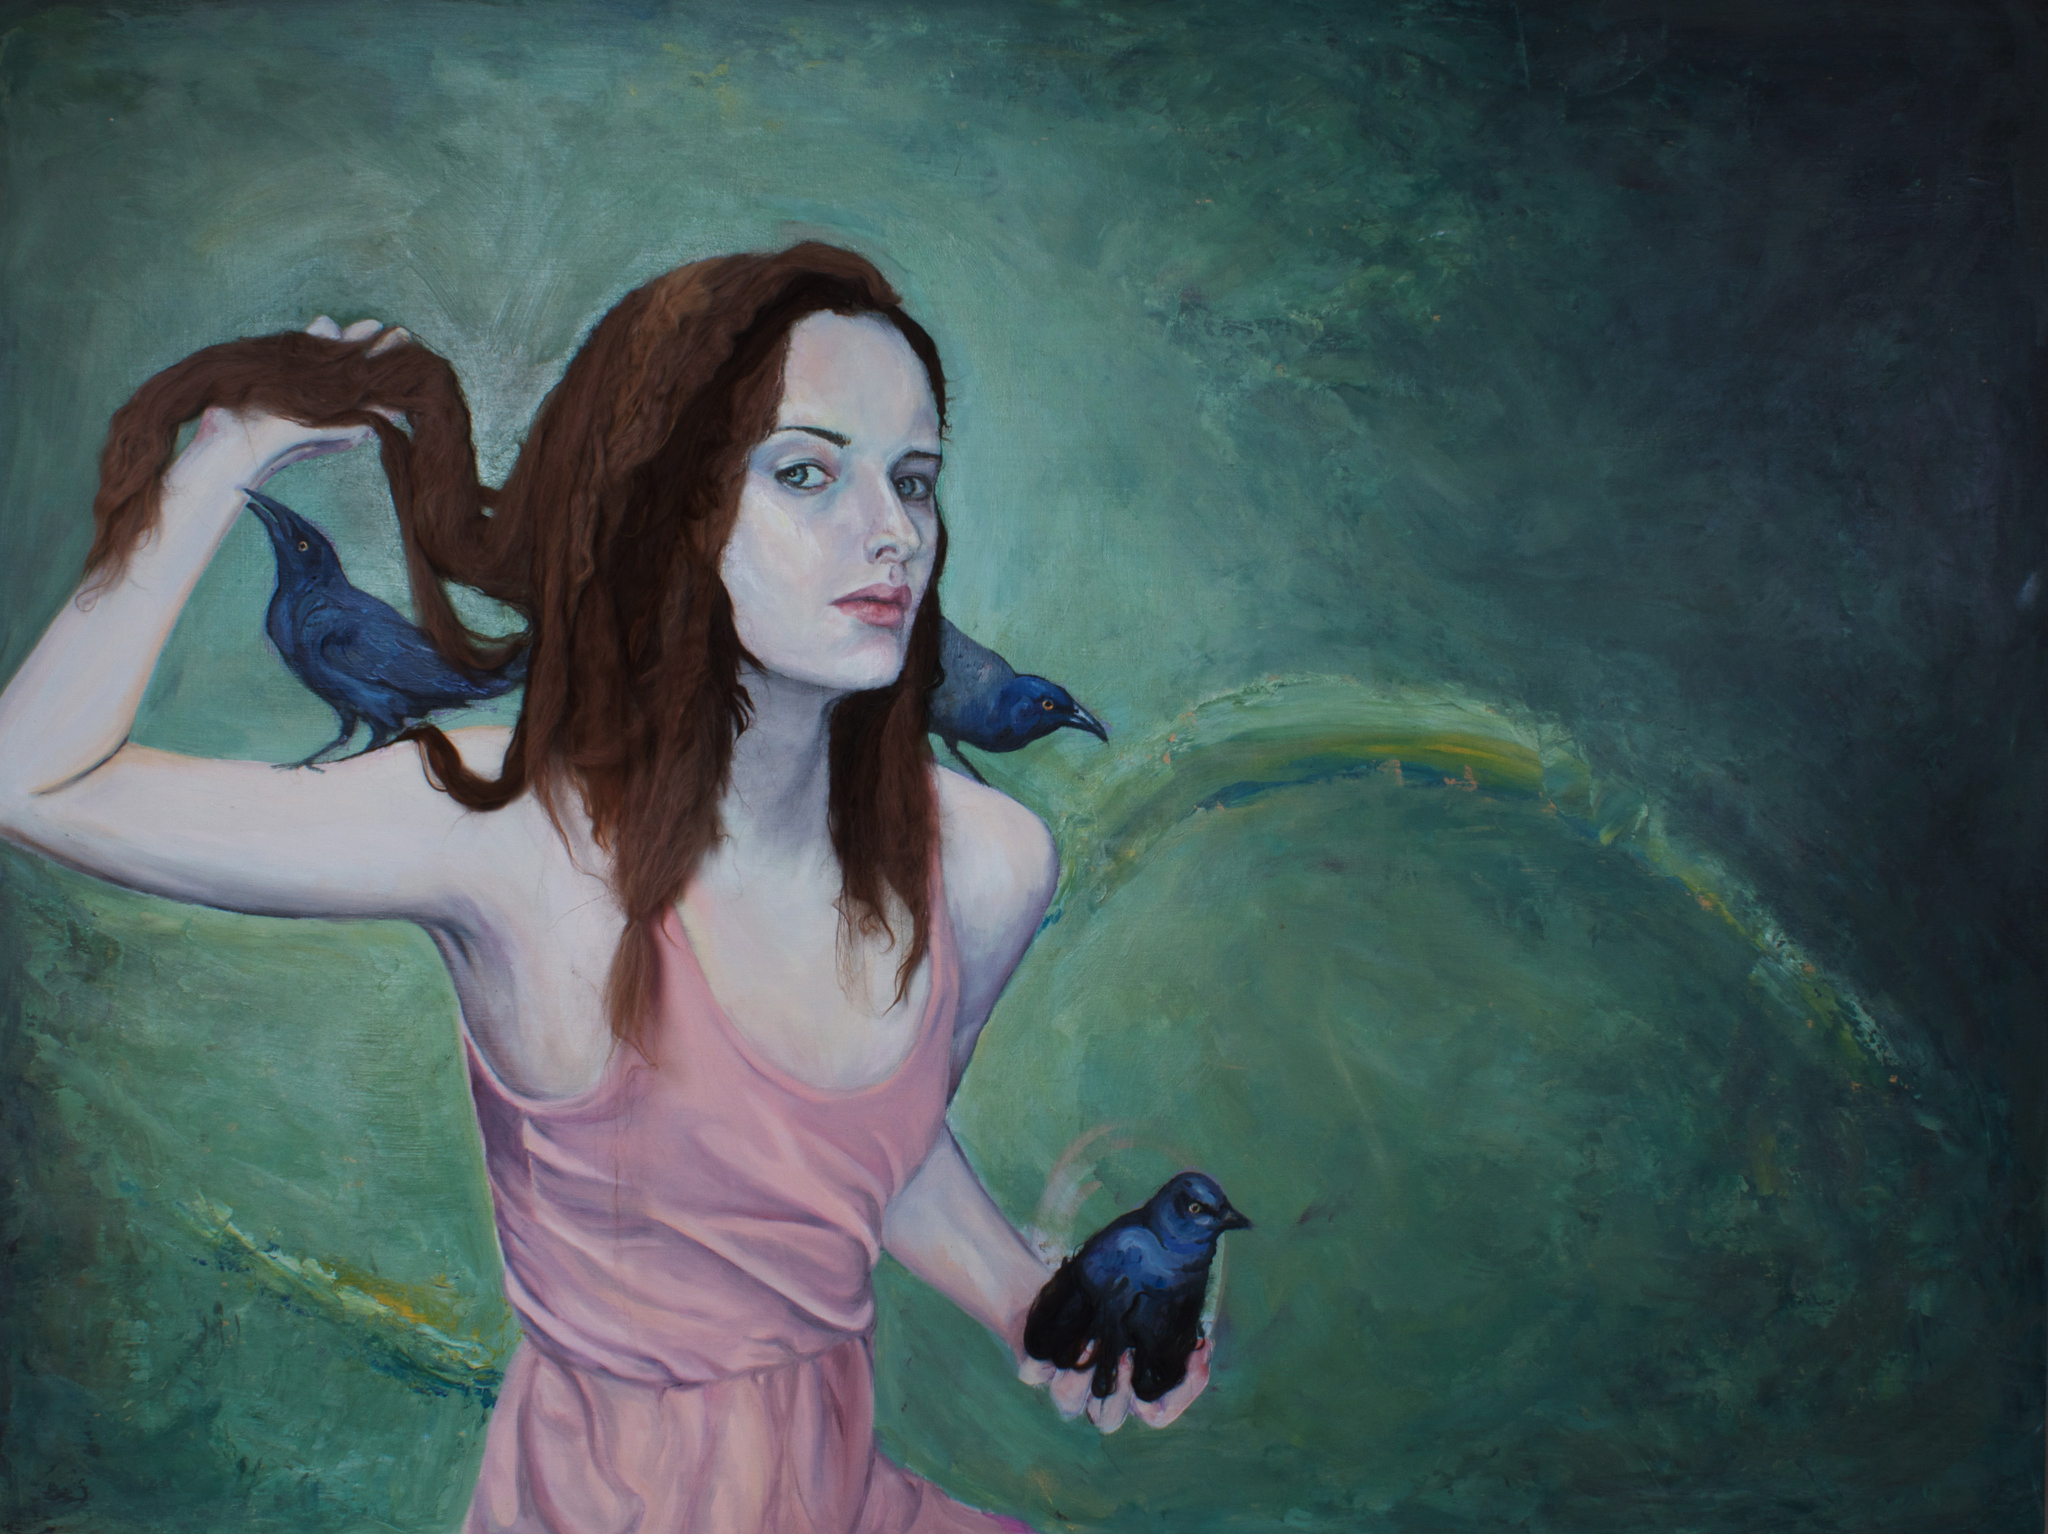    Between Swarms   (2011)  oil, acrylic, and animal fiber on panel  48" X 72" 